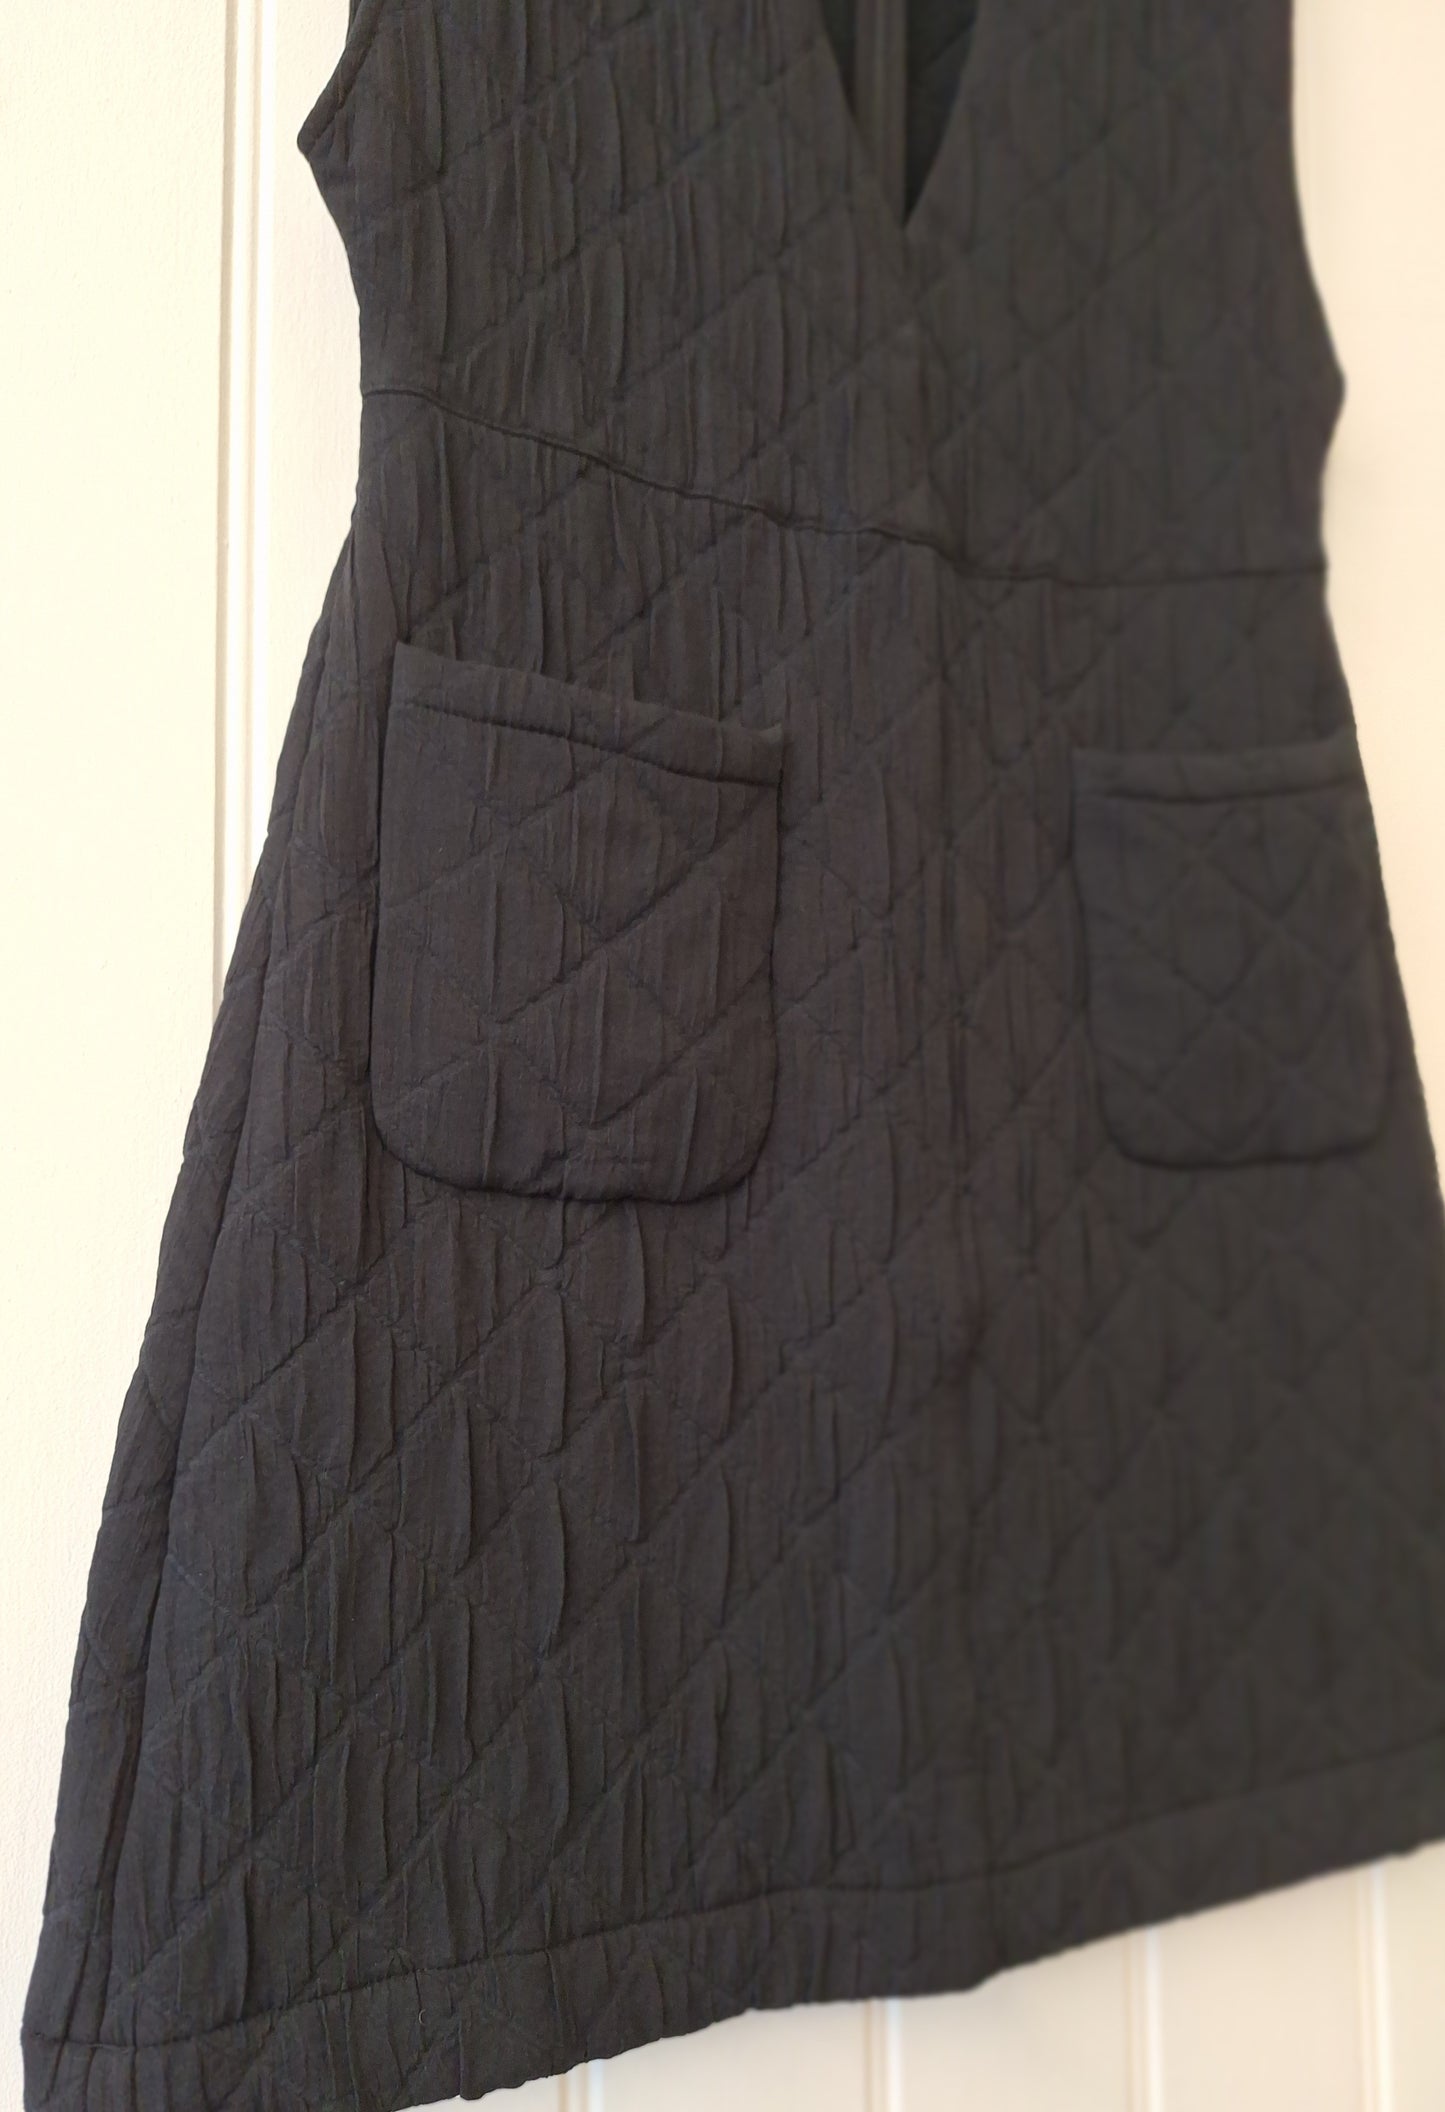 & Other Stories black quilted pinafore dress